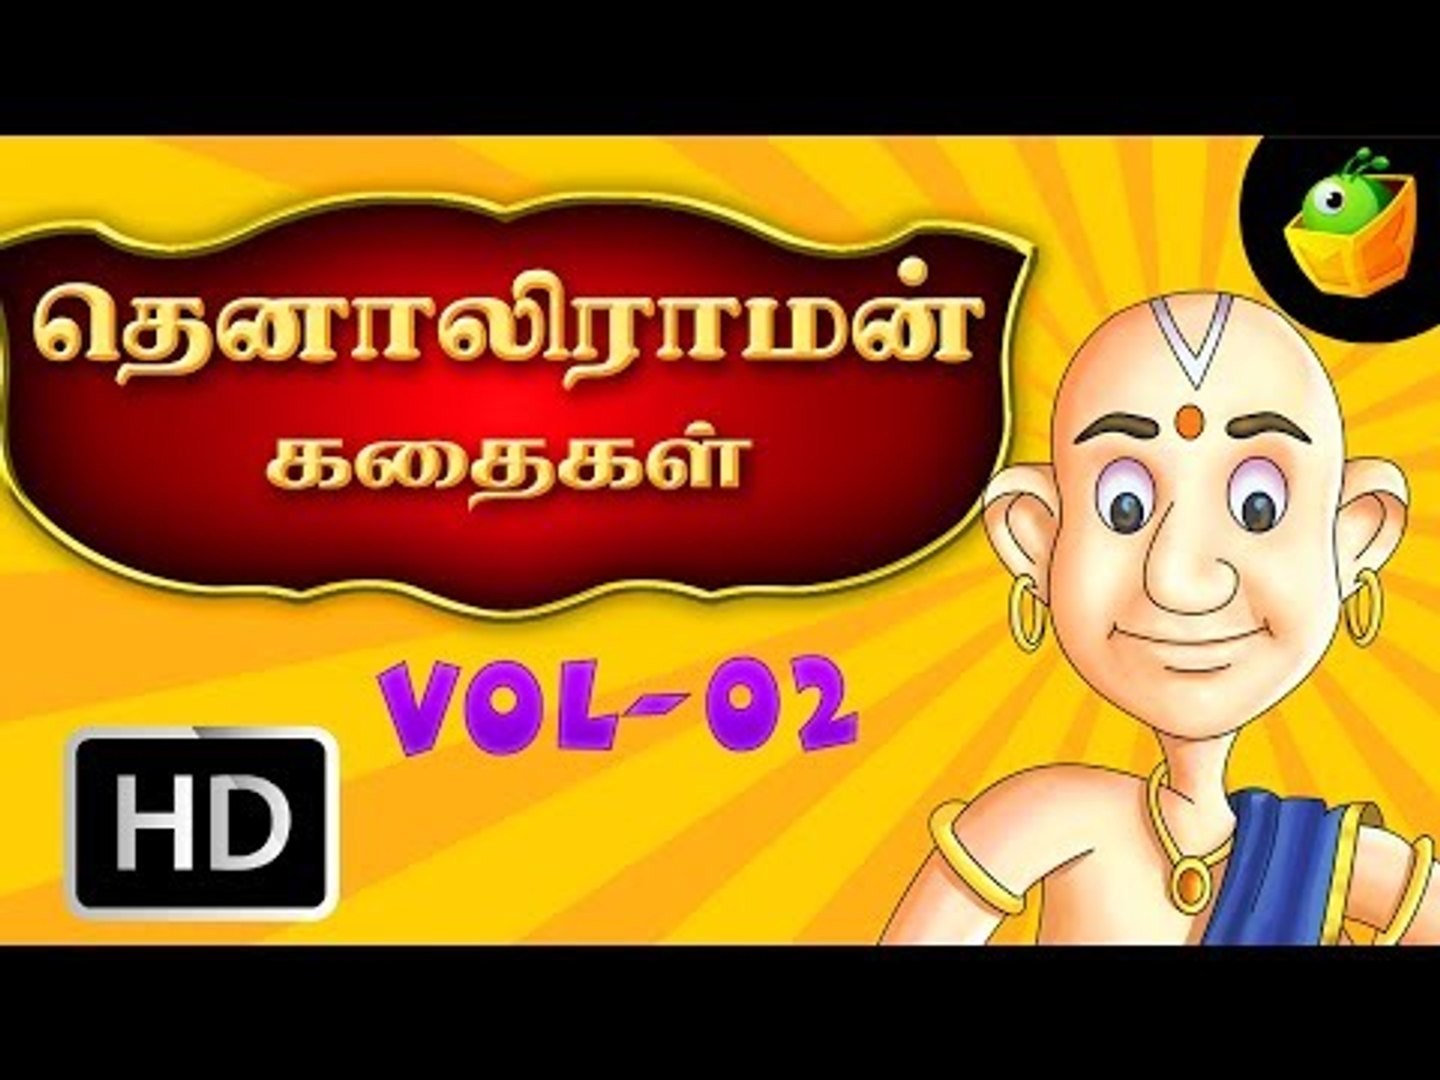 Tenali Raman Full Stories Vol 2 In Tamil (HD) - Compilation of Cartoon/ Animated Stories For Kids - video Dailymotion